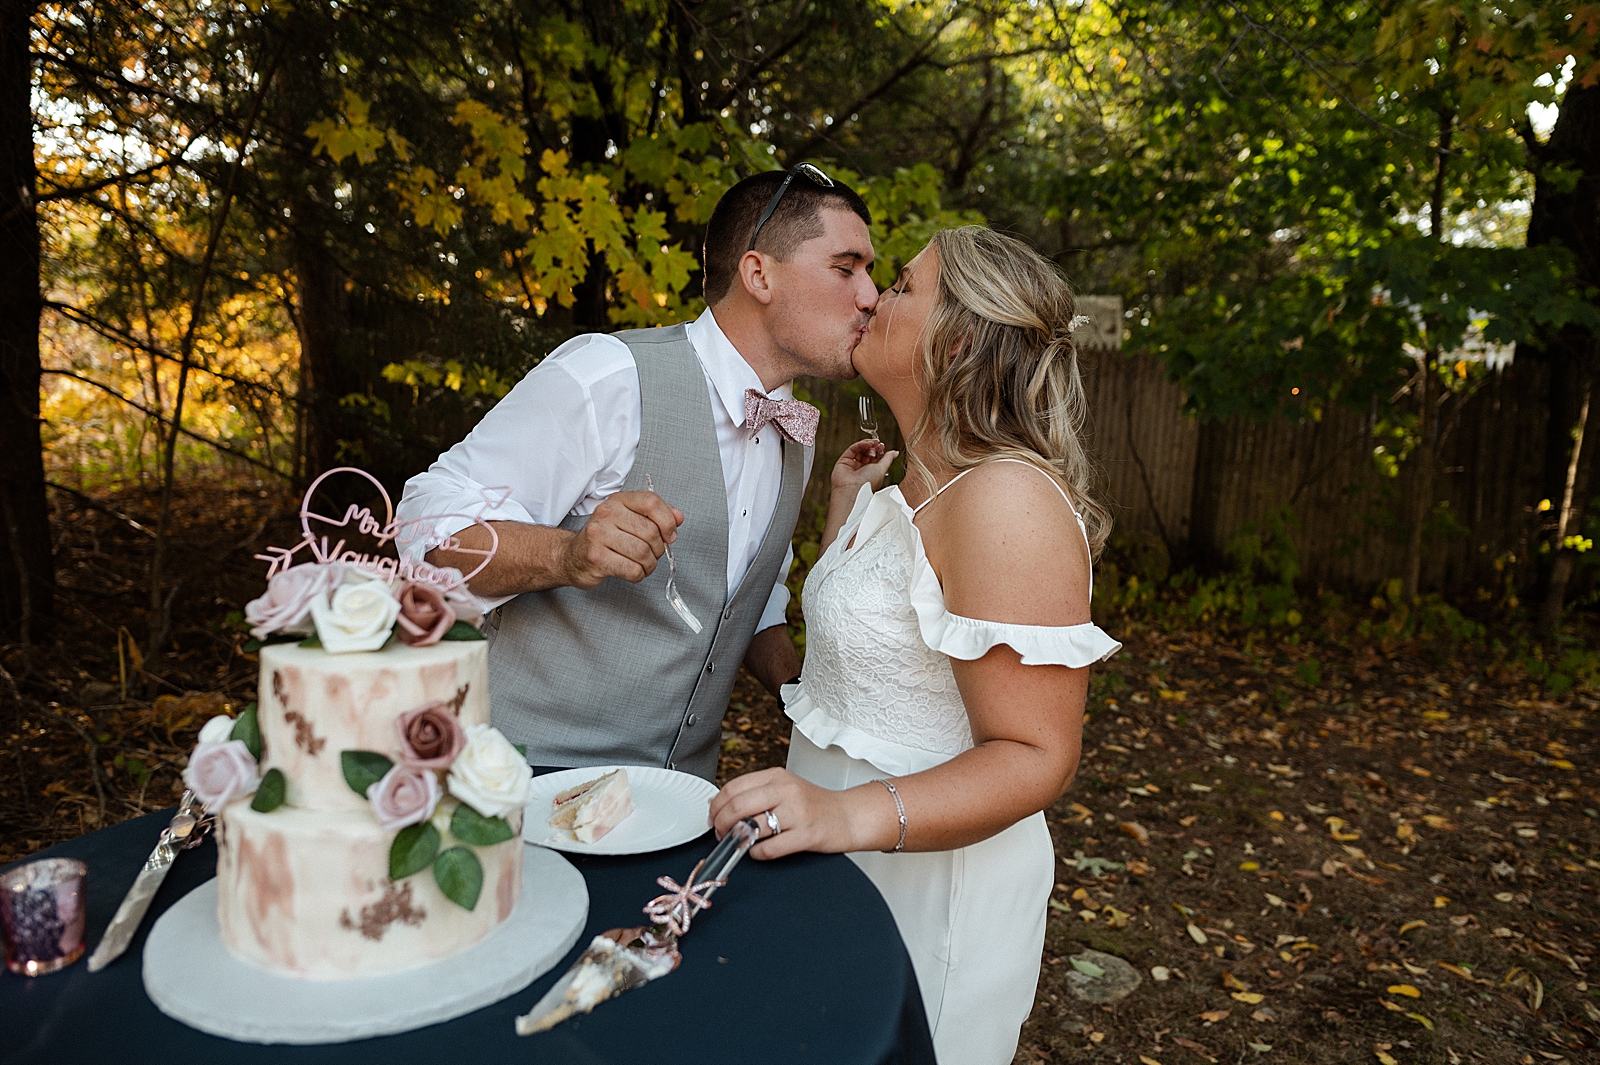 Bride and Groom kissing after cake tasting